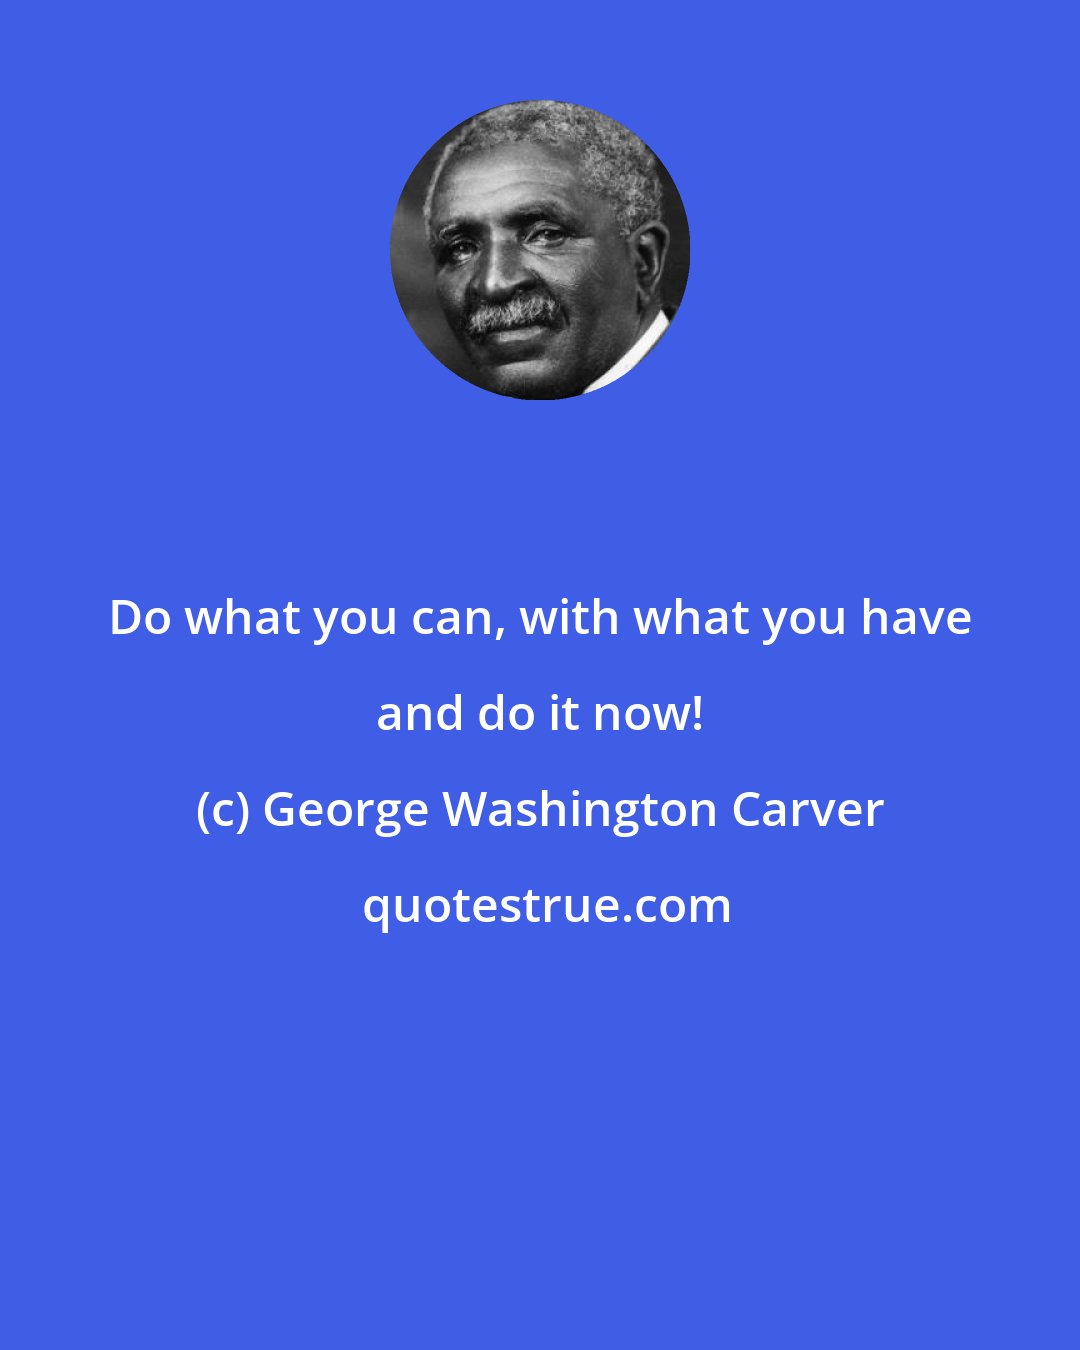 George Washington Carver: Do what you can, with what you have and do it now!